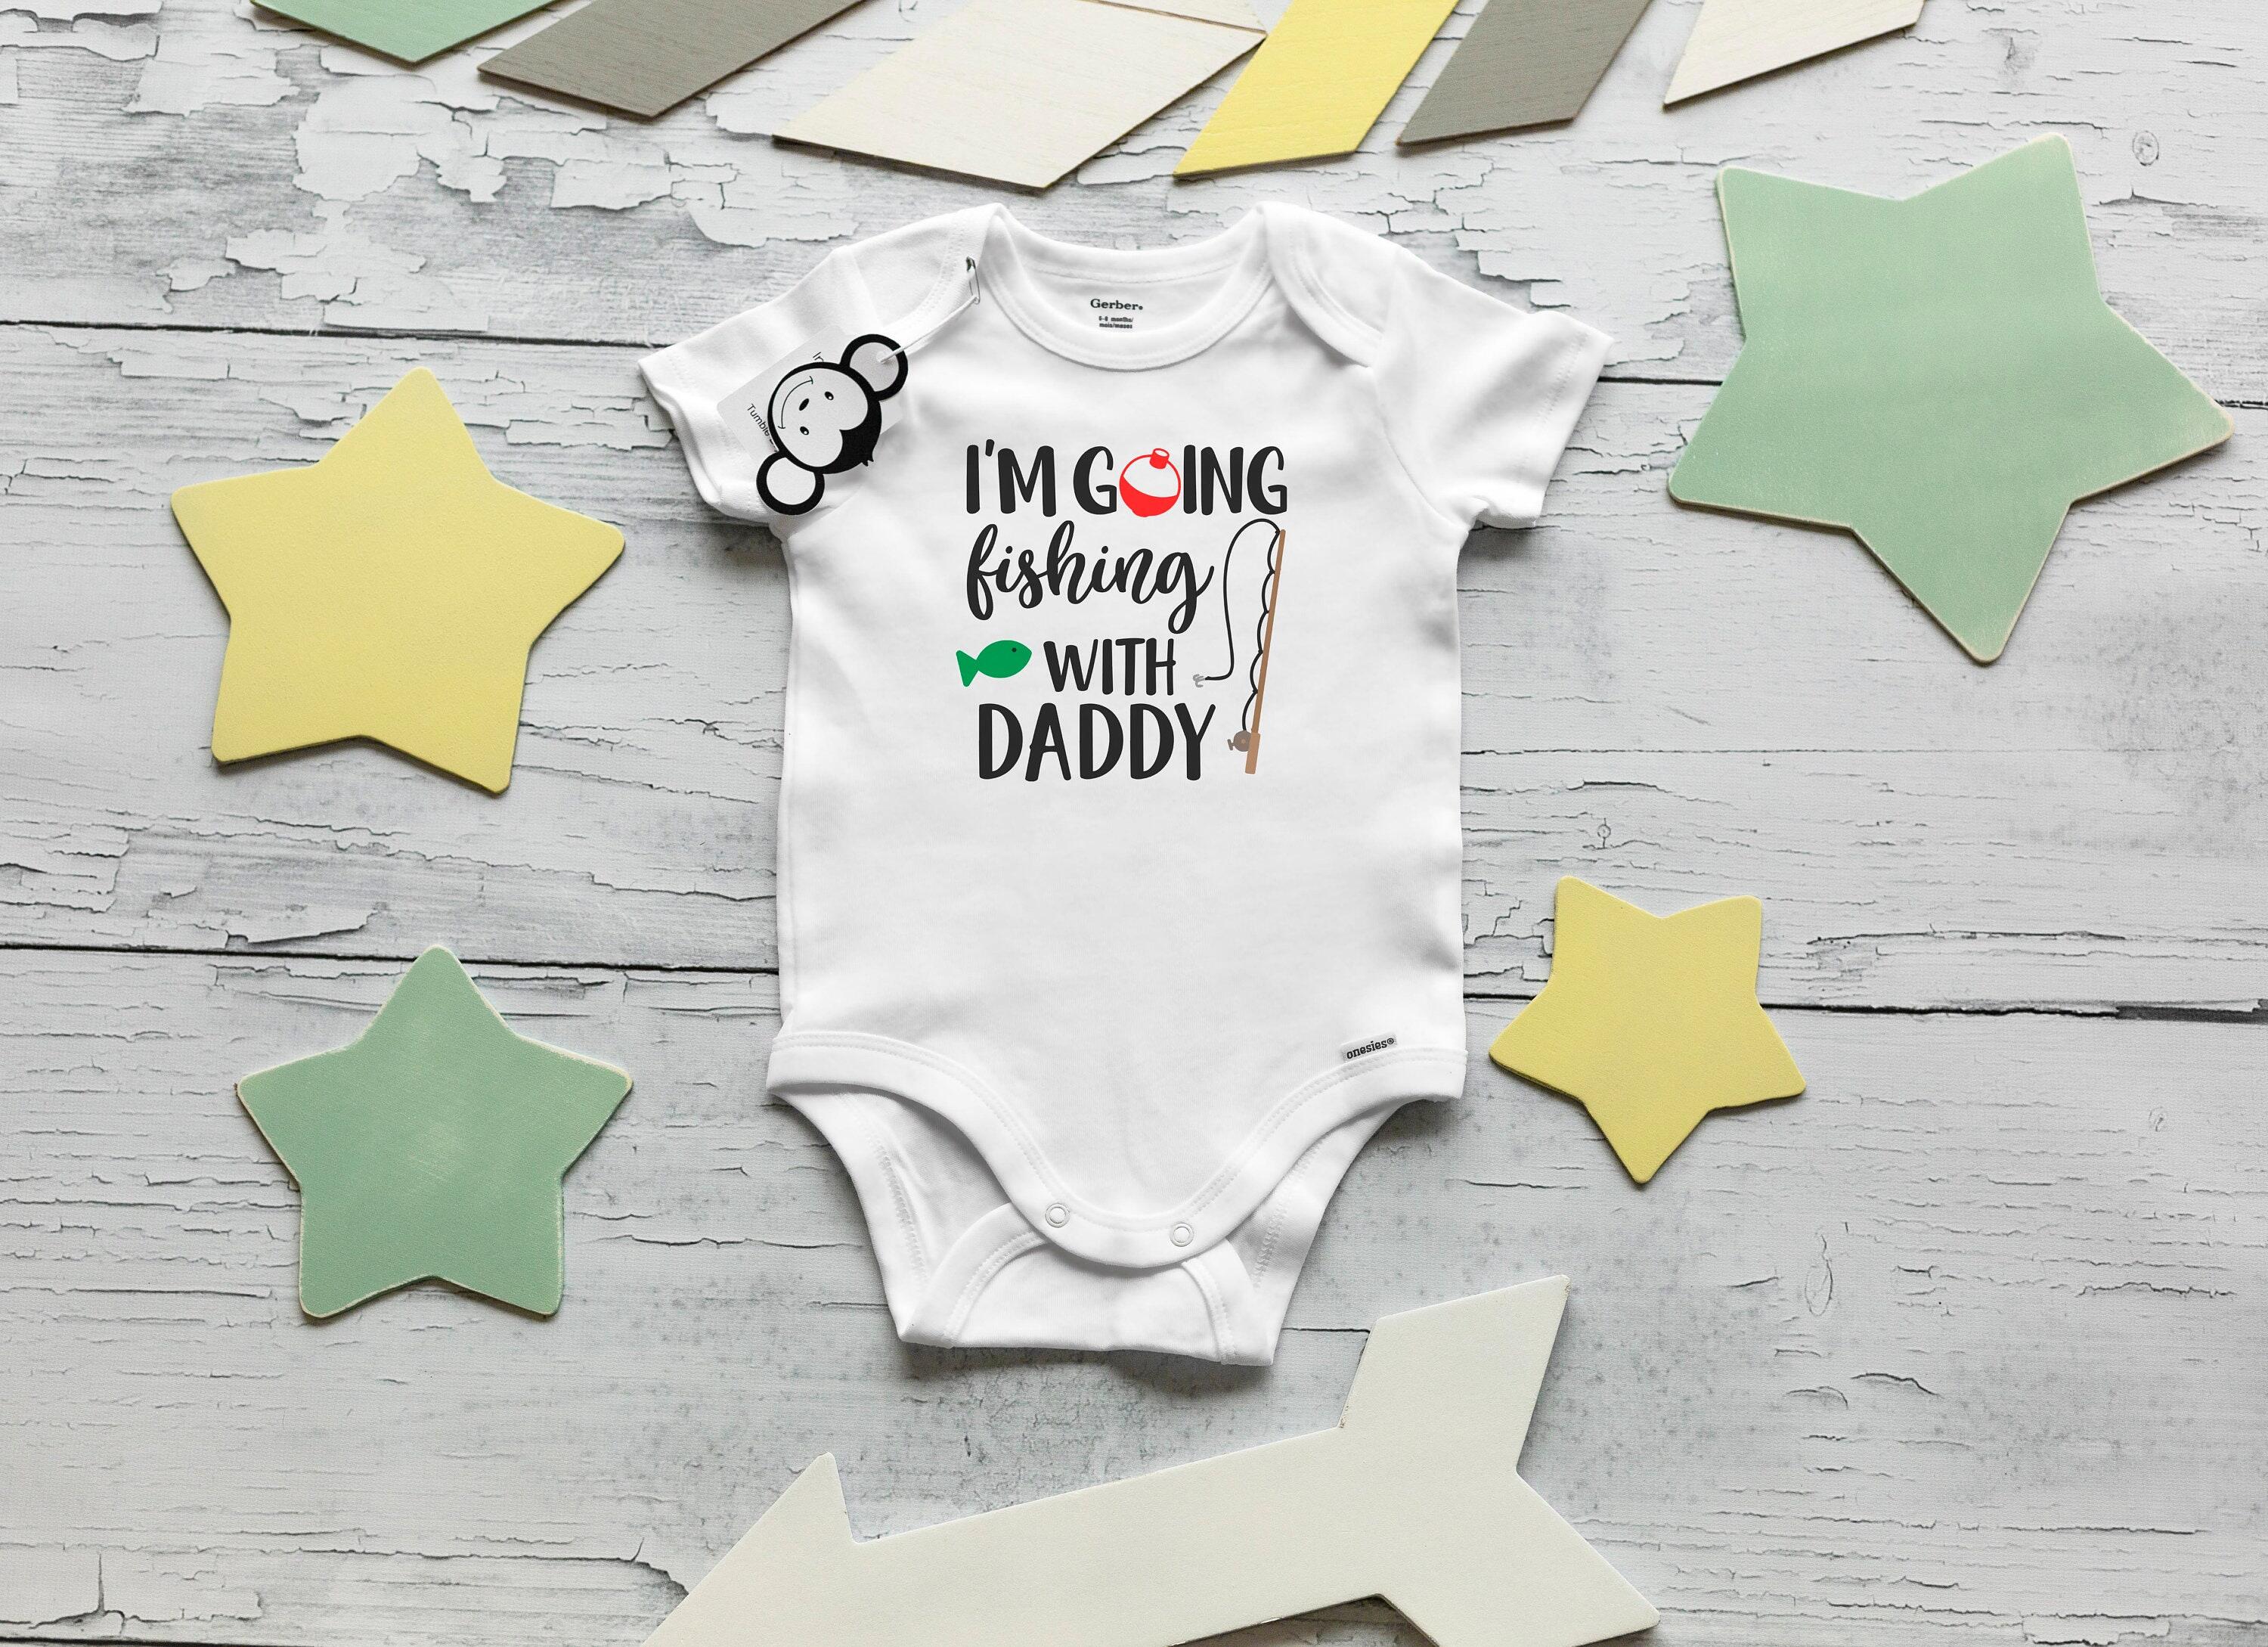 Clothing & Accessories :: Kids & Baby :: Baby Clothing :: Fishing Onesie®, Fishing  Baby Clothes, Fishing with Dad, Daddy's Fishing Buddy Onesie, Baby Shower  Gift, Baby Boy Clothes, Baby Girl Clothes